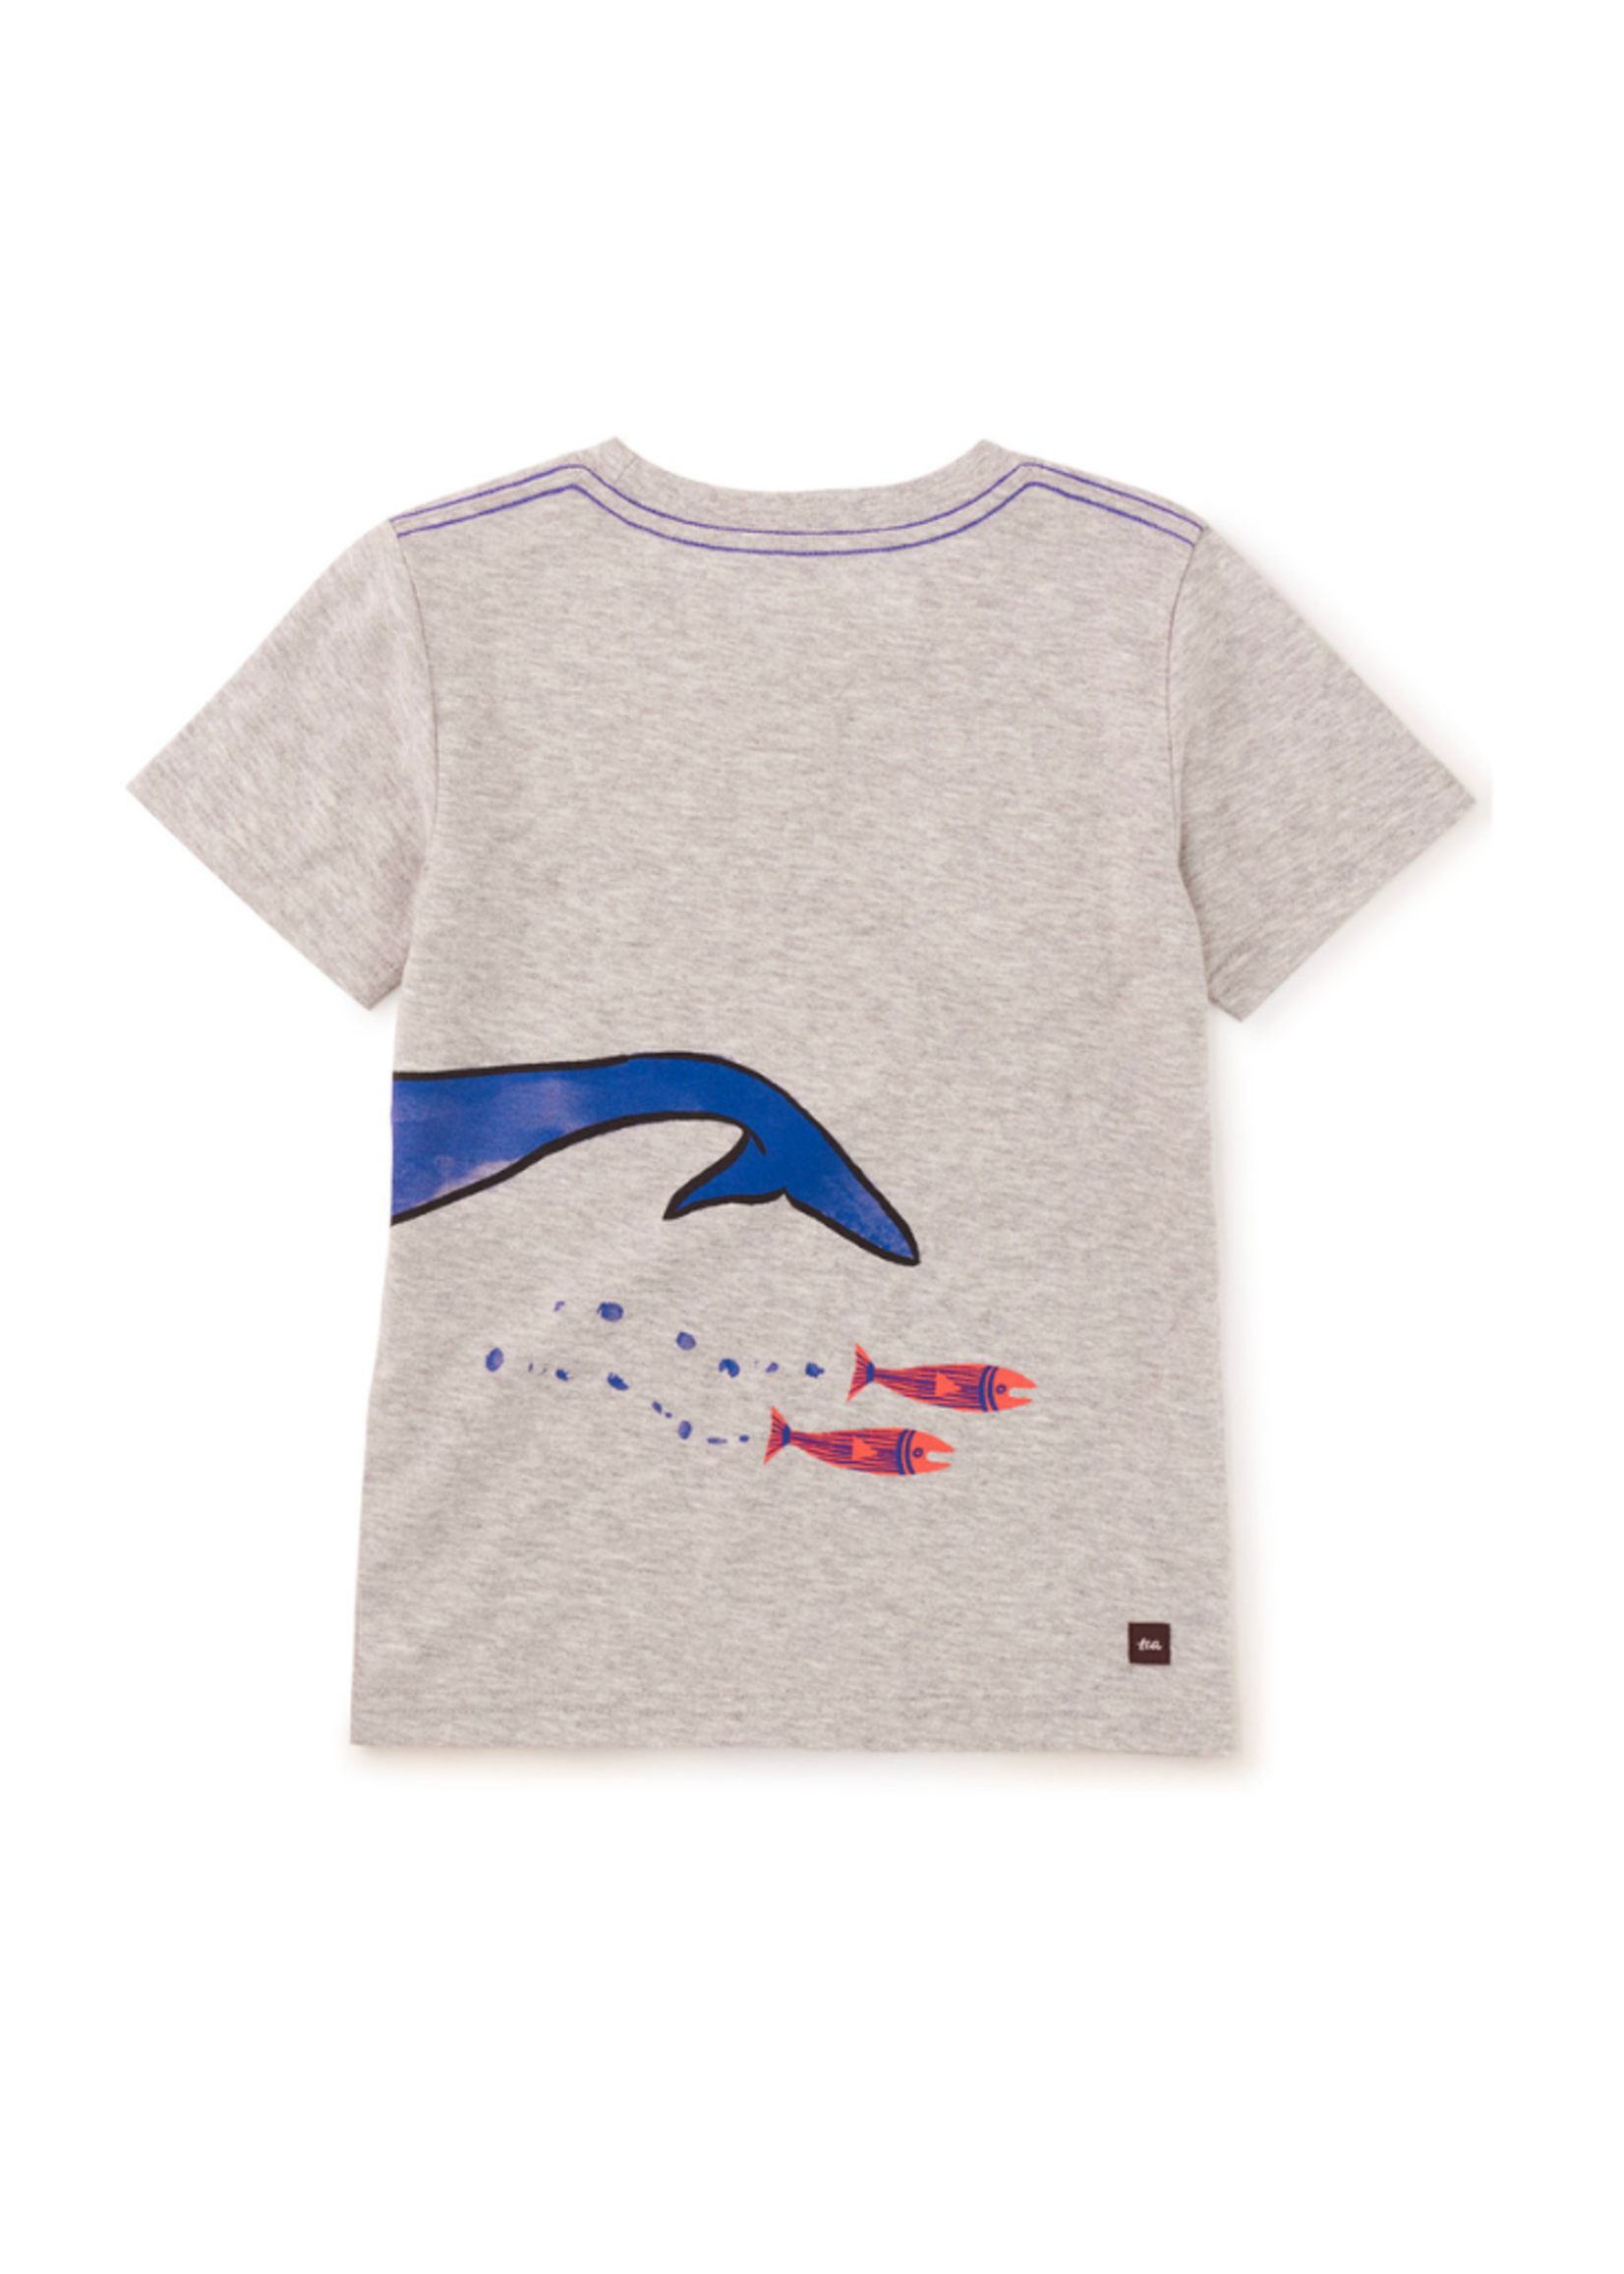 Tea Collection Whale of a Time Tee